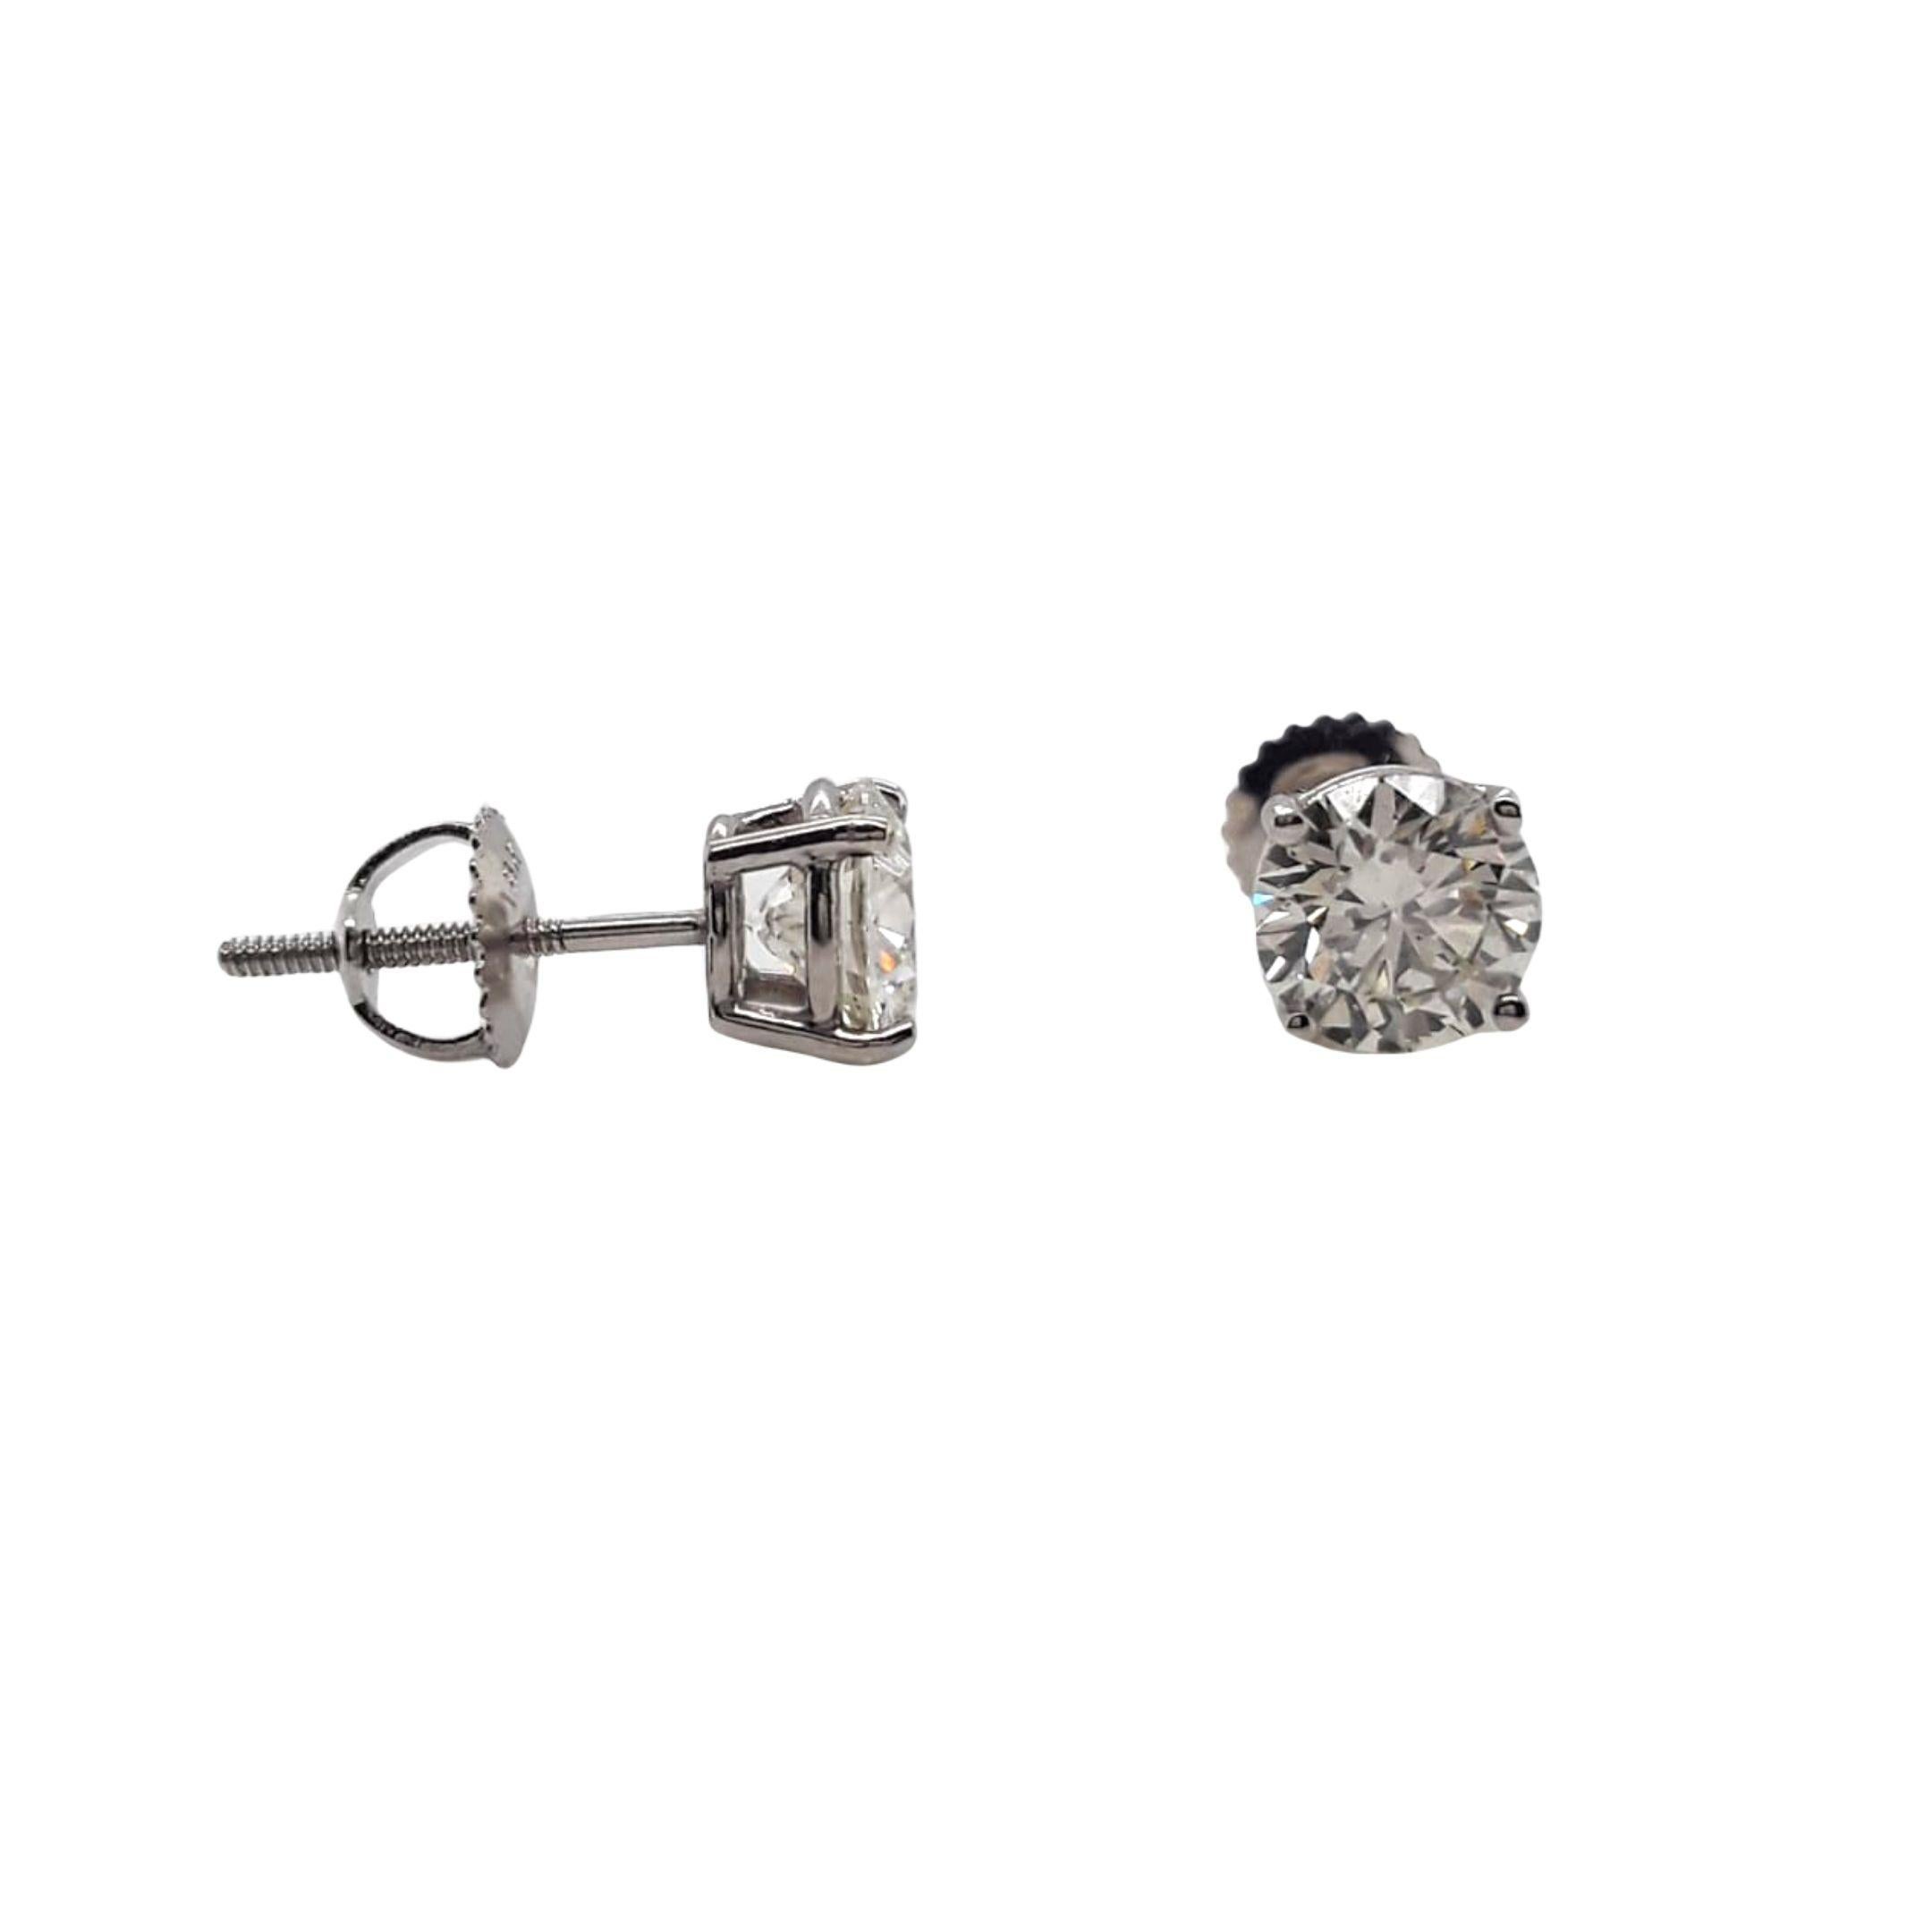 GIA Certified Diamond Stud Earrings made with natural brilliant cut diamonds. Total Weight: 2.06 carats, Stone Diameter: 6.47 x 6.59, Color: J, Clarity: SI2. Set on a 4 prong mounting in 18 karat white gold, screw back setting. 